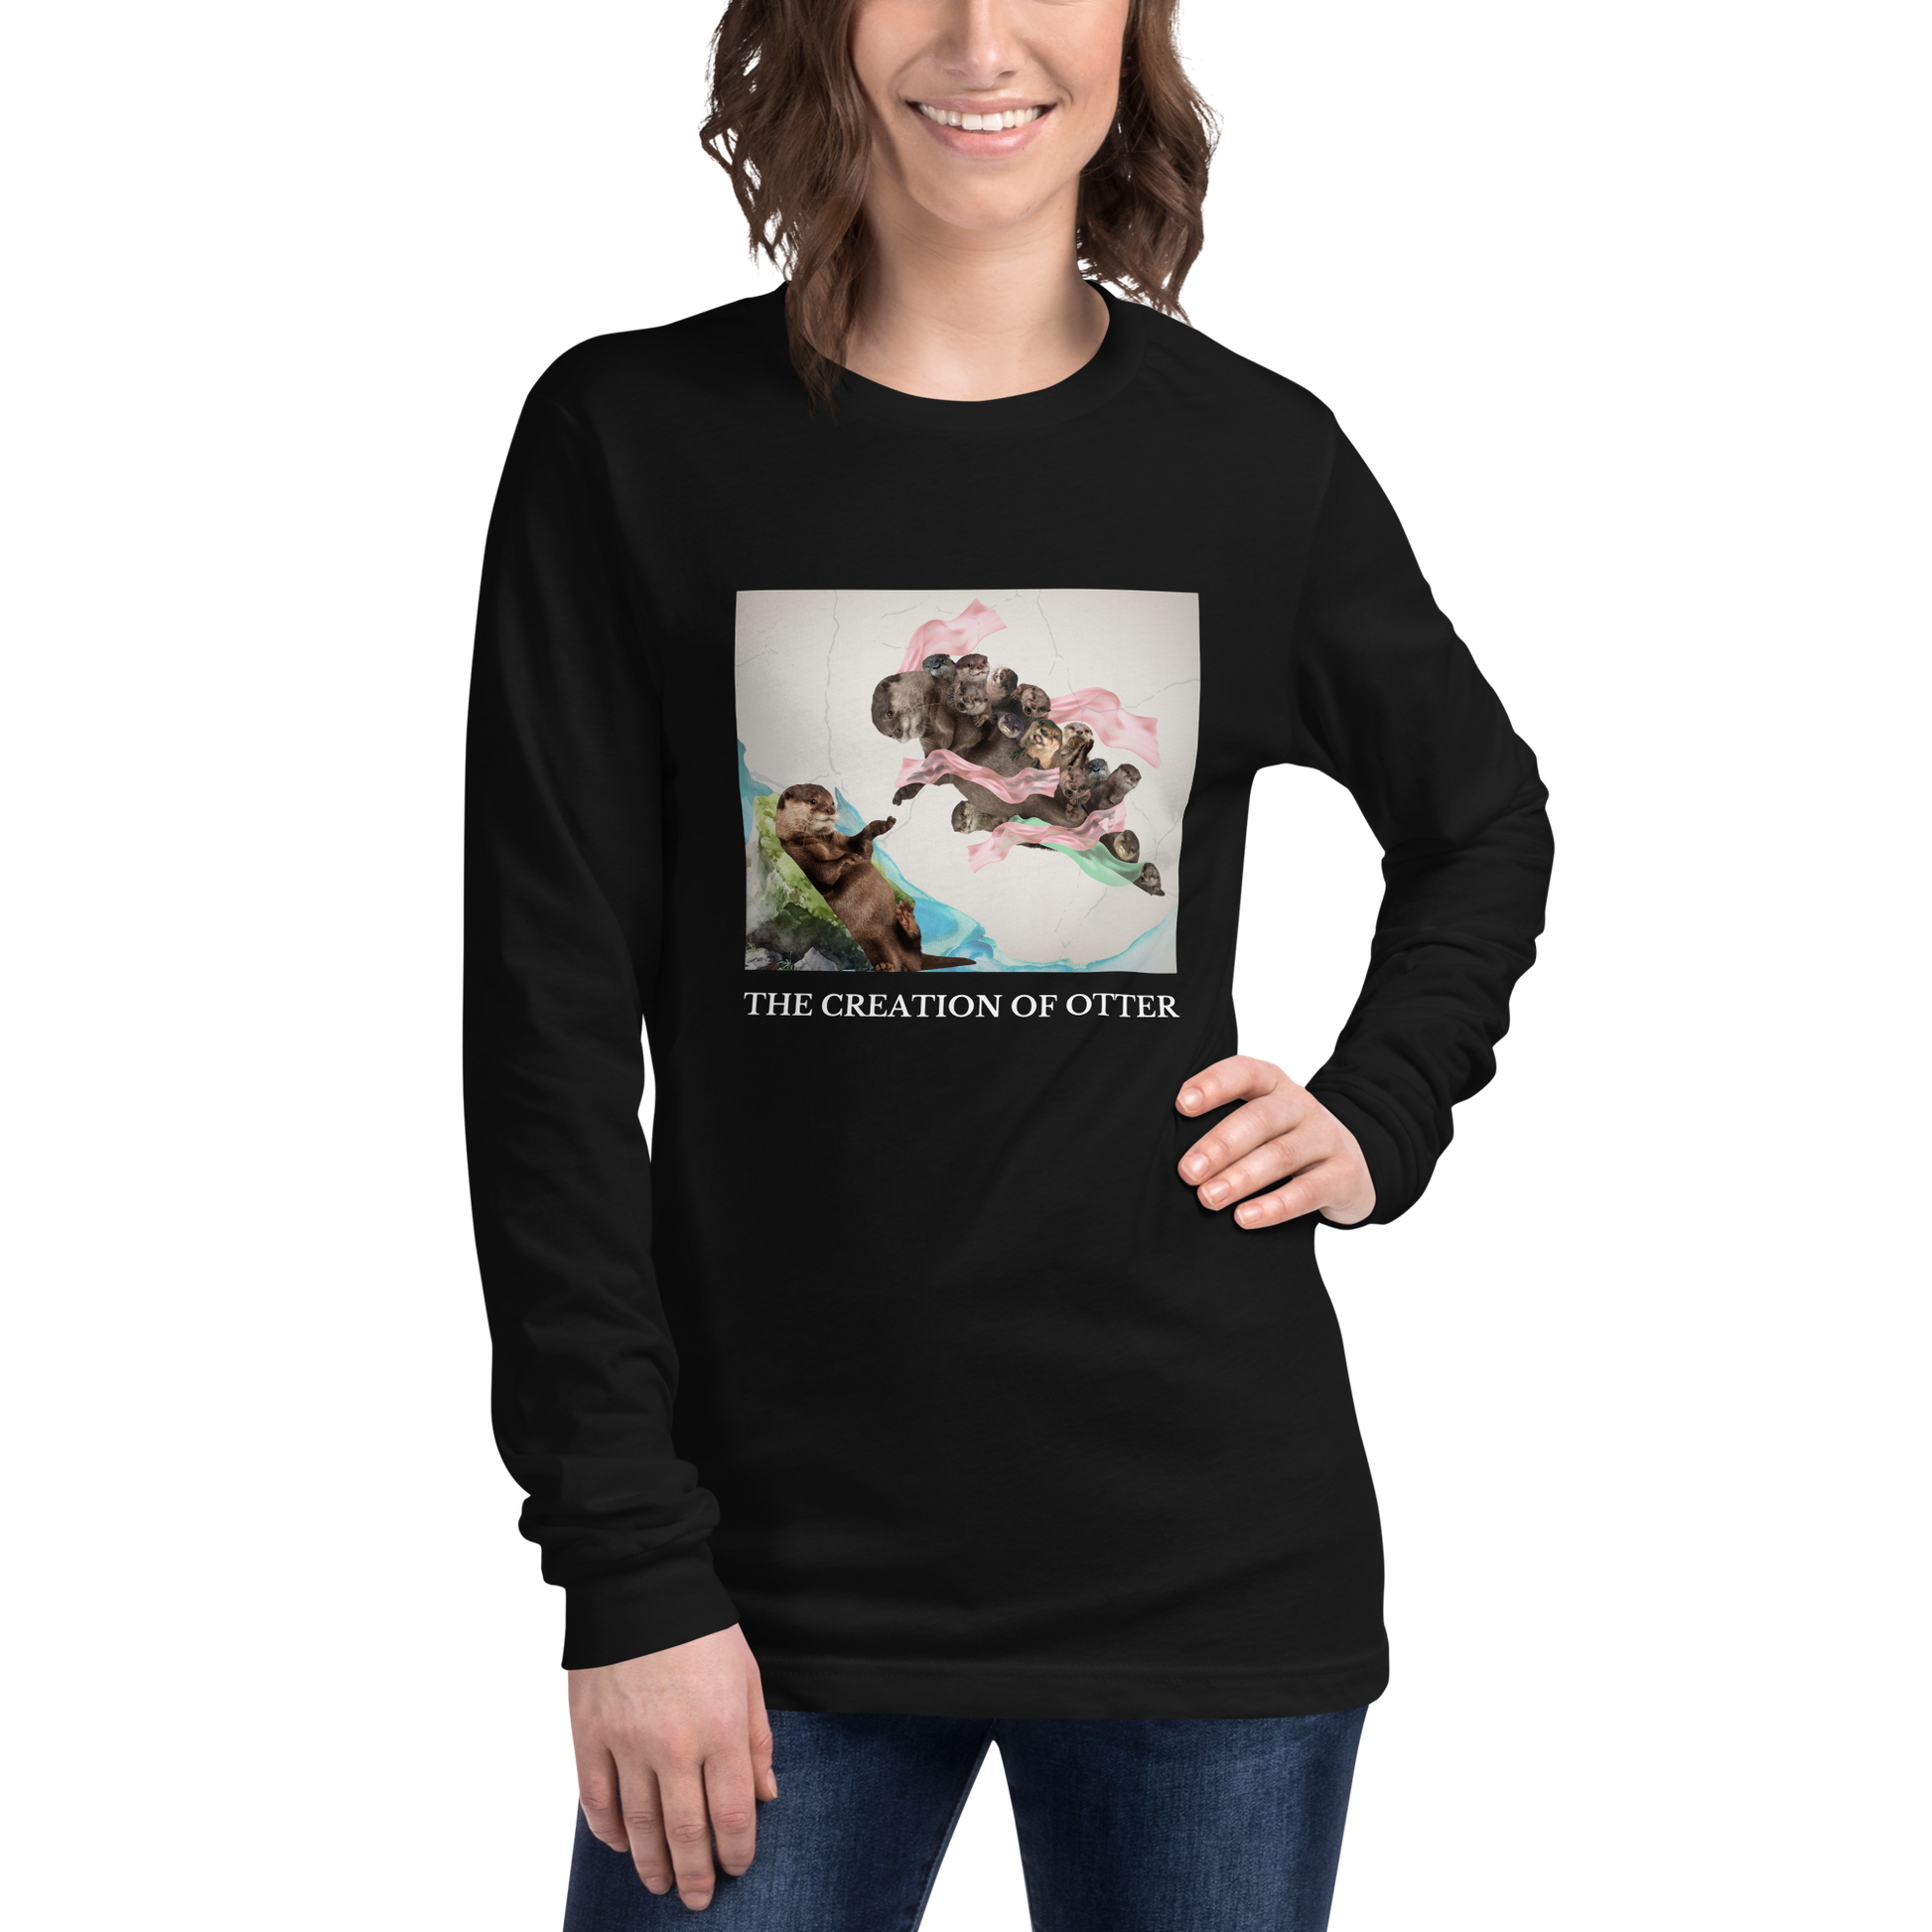 Woman wearing a Black Otter Long Sleeve Tee featuring a playful The Creation of Otter parody of Michelangelo's masterpiece - Artsy/Funny Otter Long Sleeve Graphic Tees - Boozy Fox